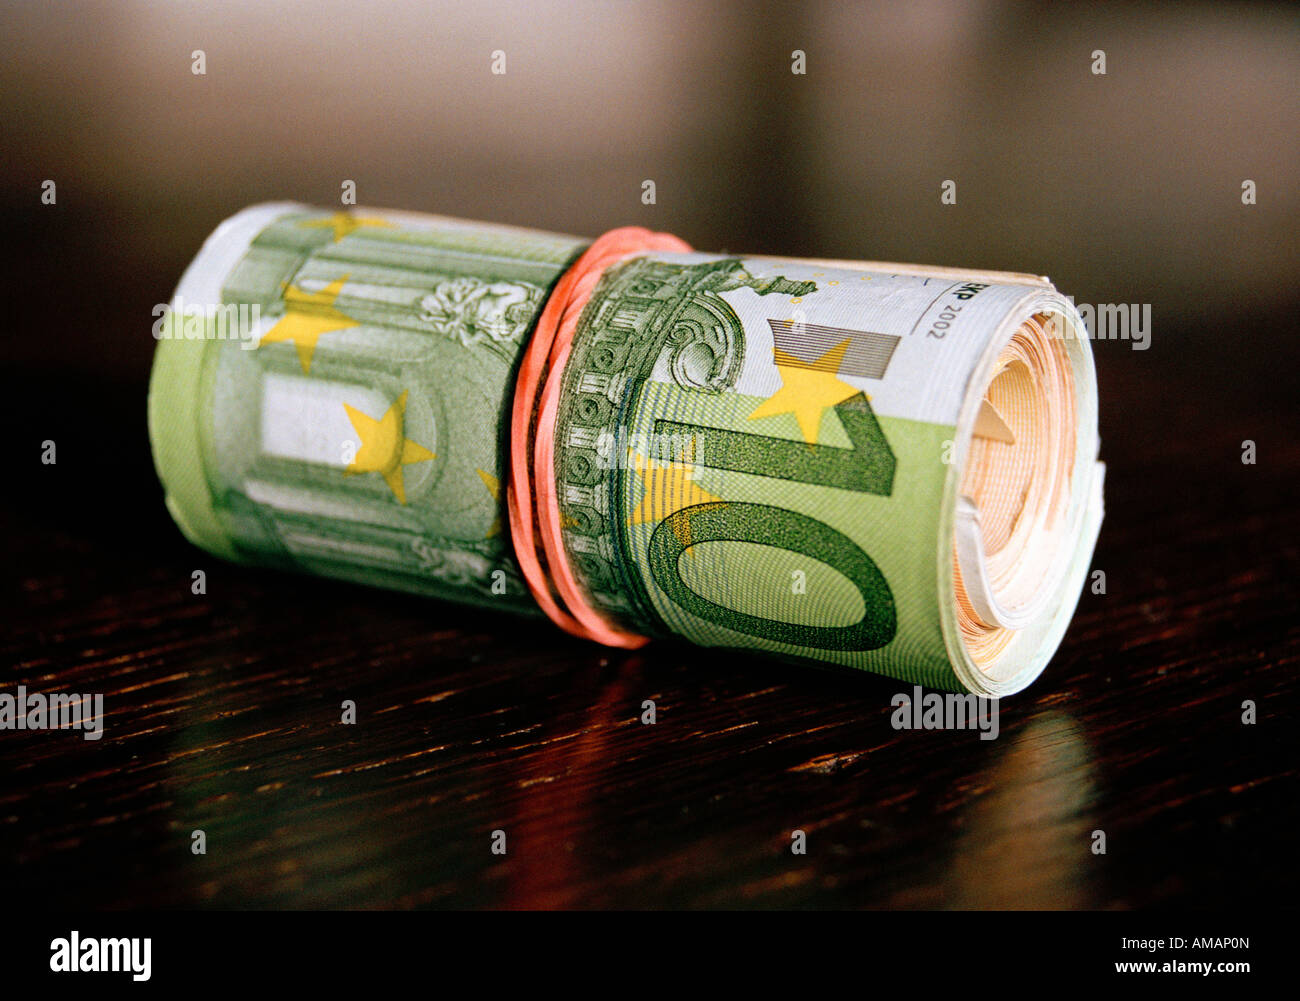 A roll of Euro banknotes Stock Photo